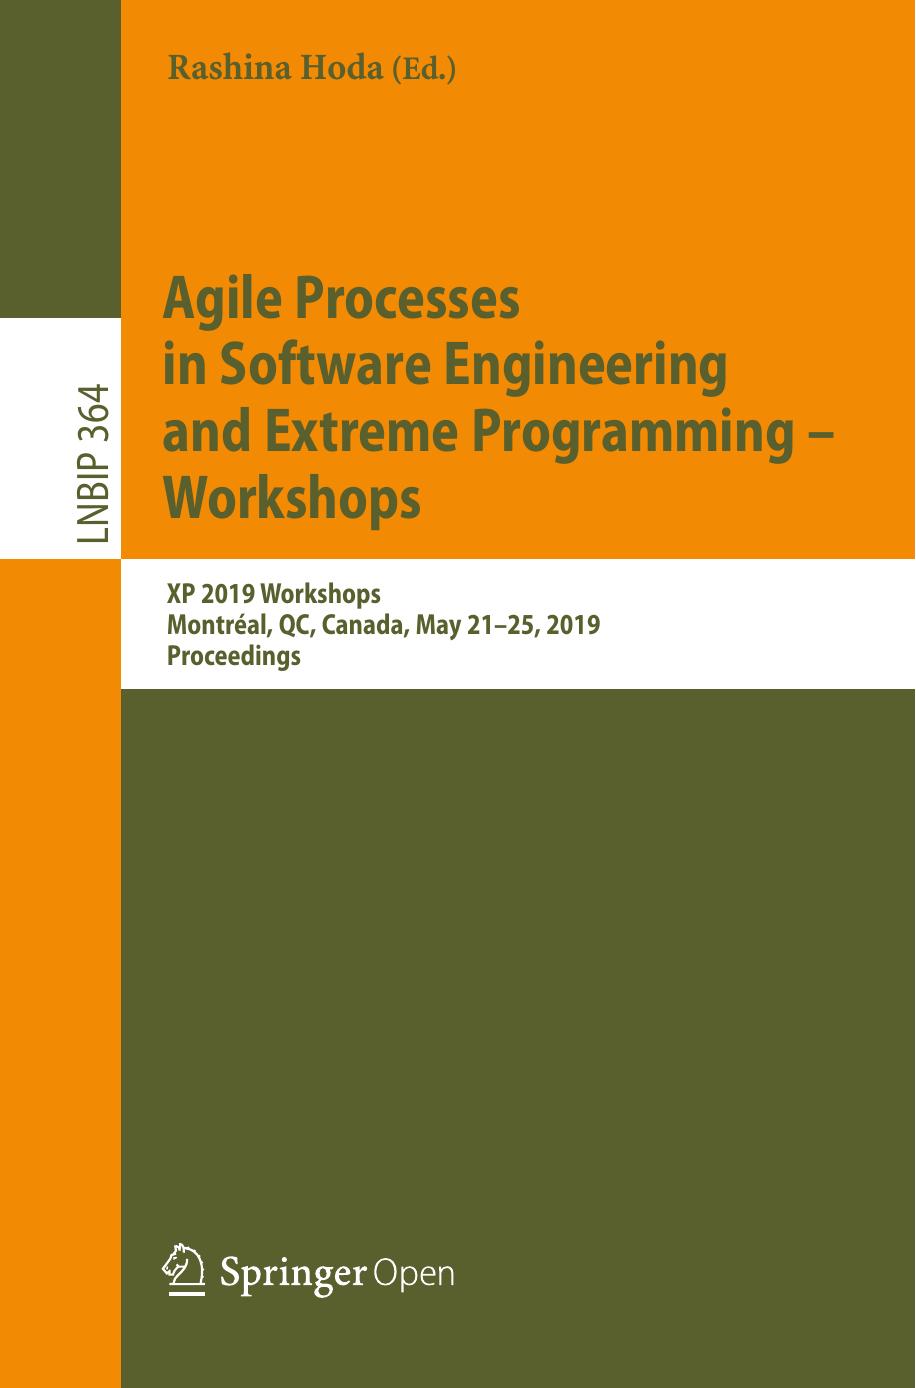 Agile Processes in Software Engineering and Extreme Programming – Workshops by Rashina Hoda